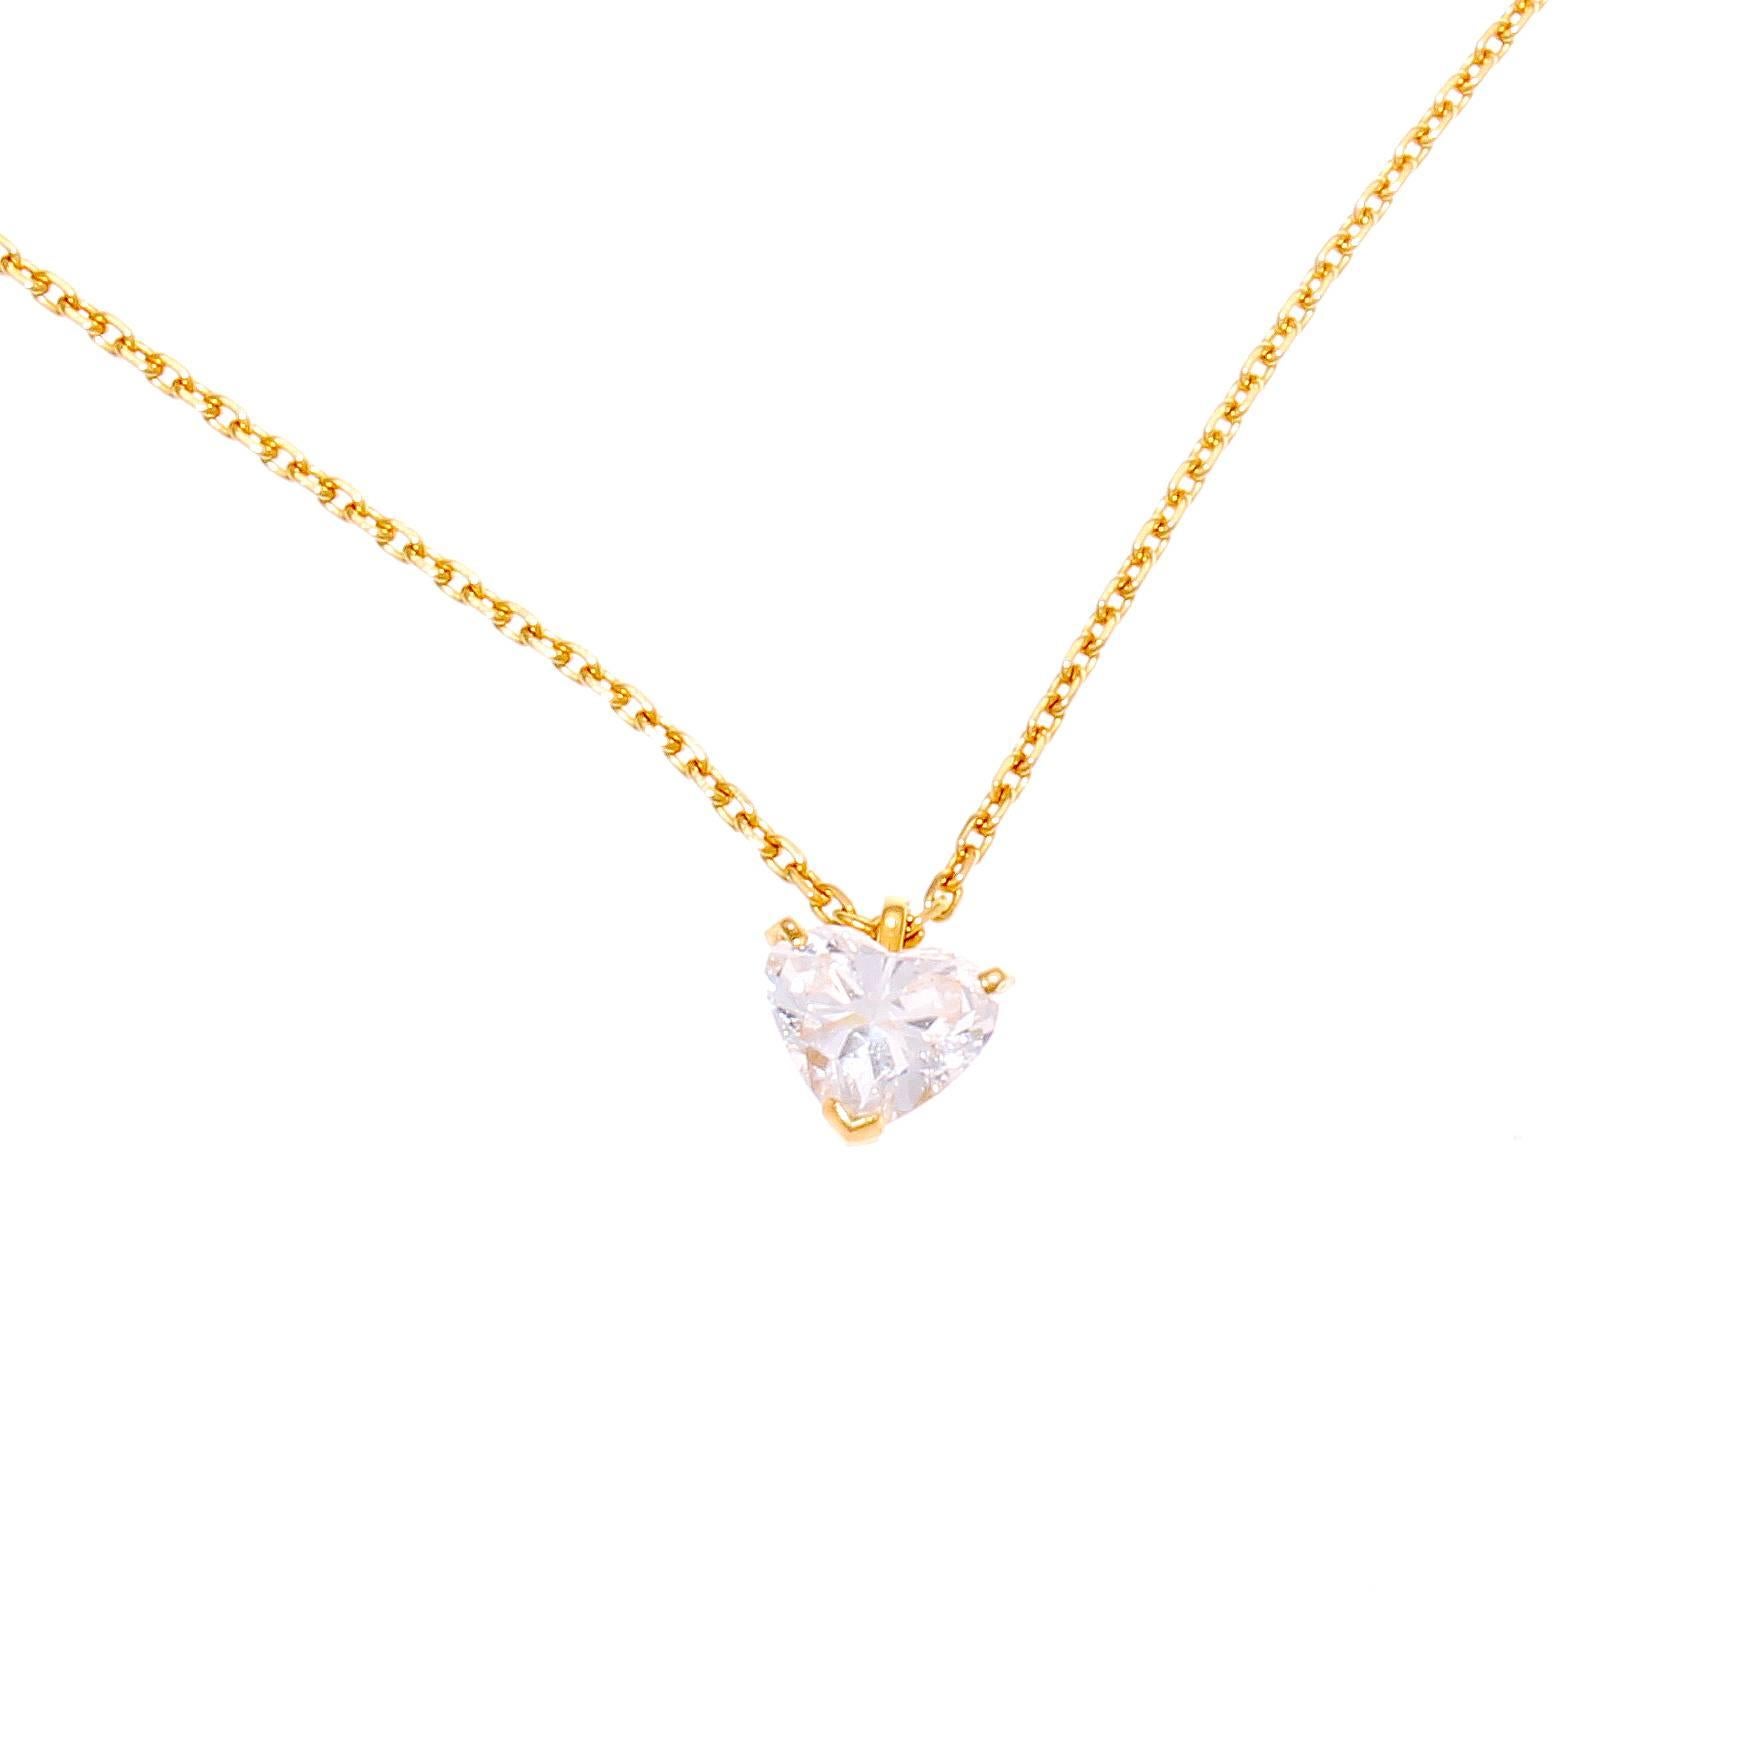 Modern Fred Paris 1.11 Carat GIA Certified Heart-Shaped Diamond Gold Necklace